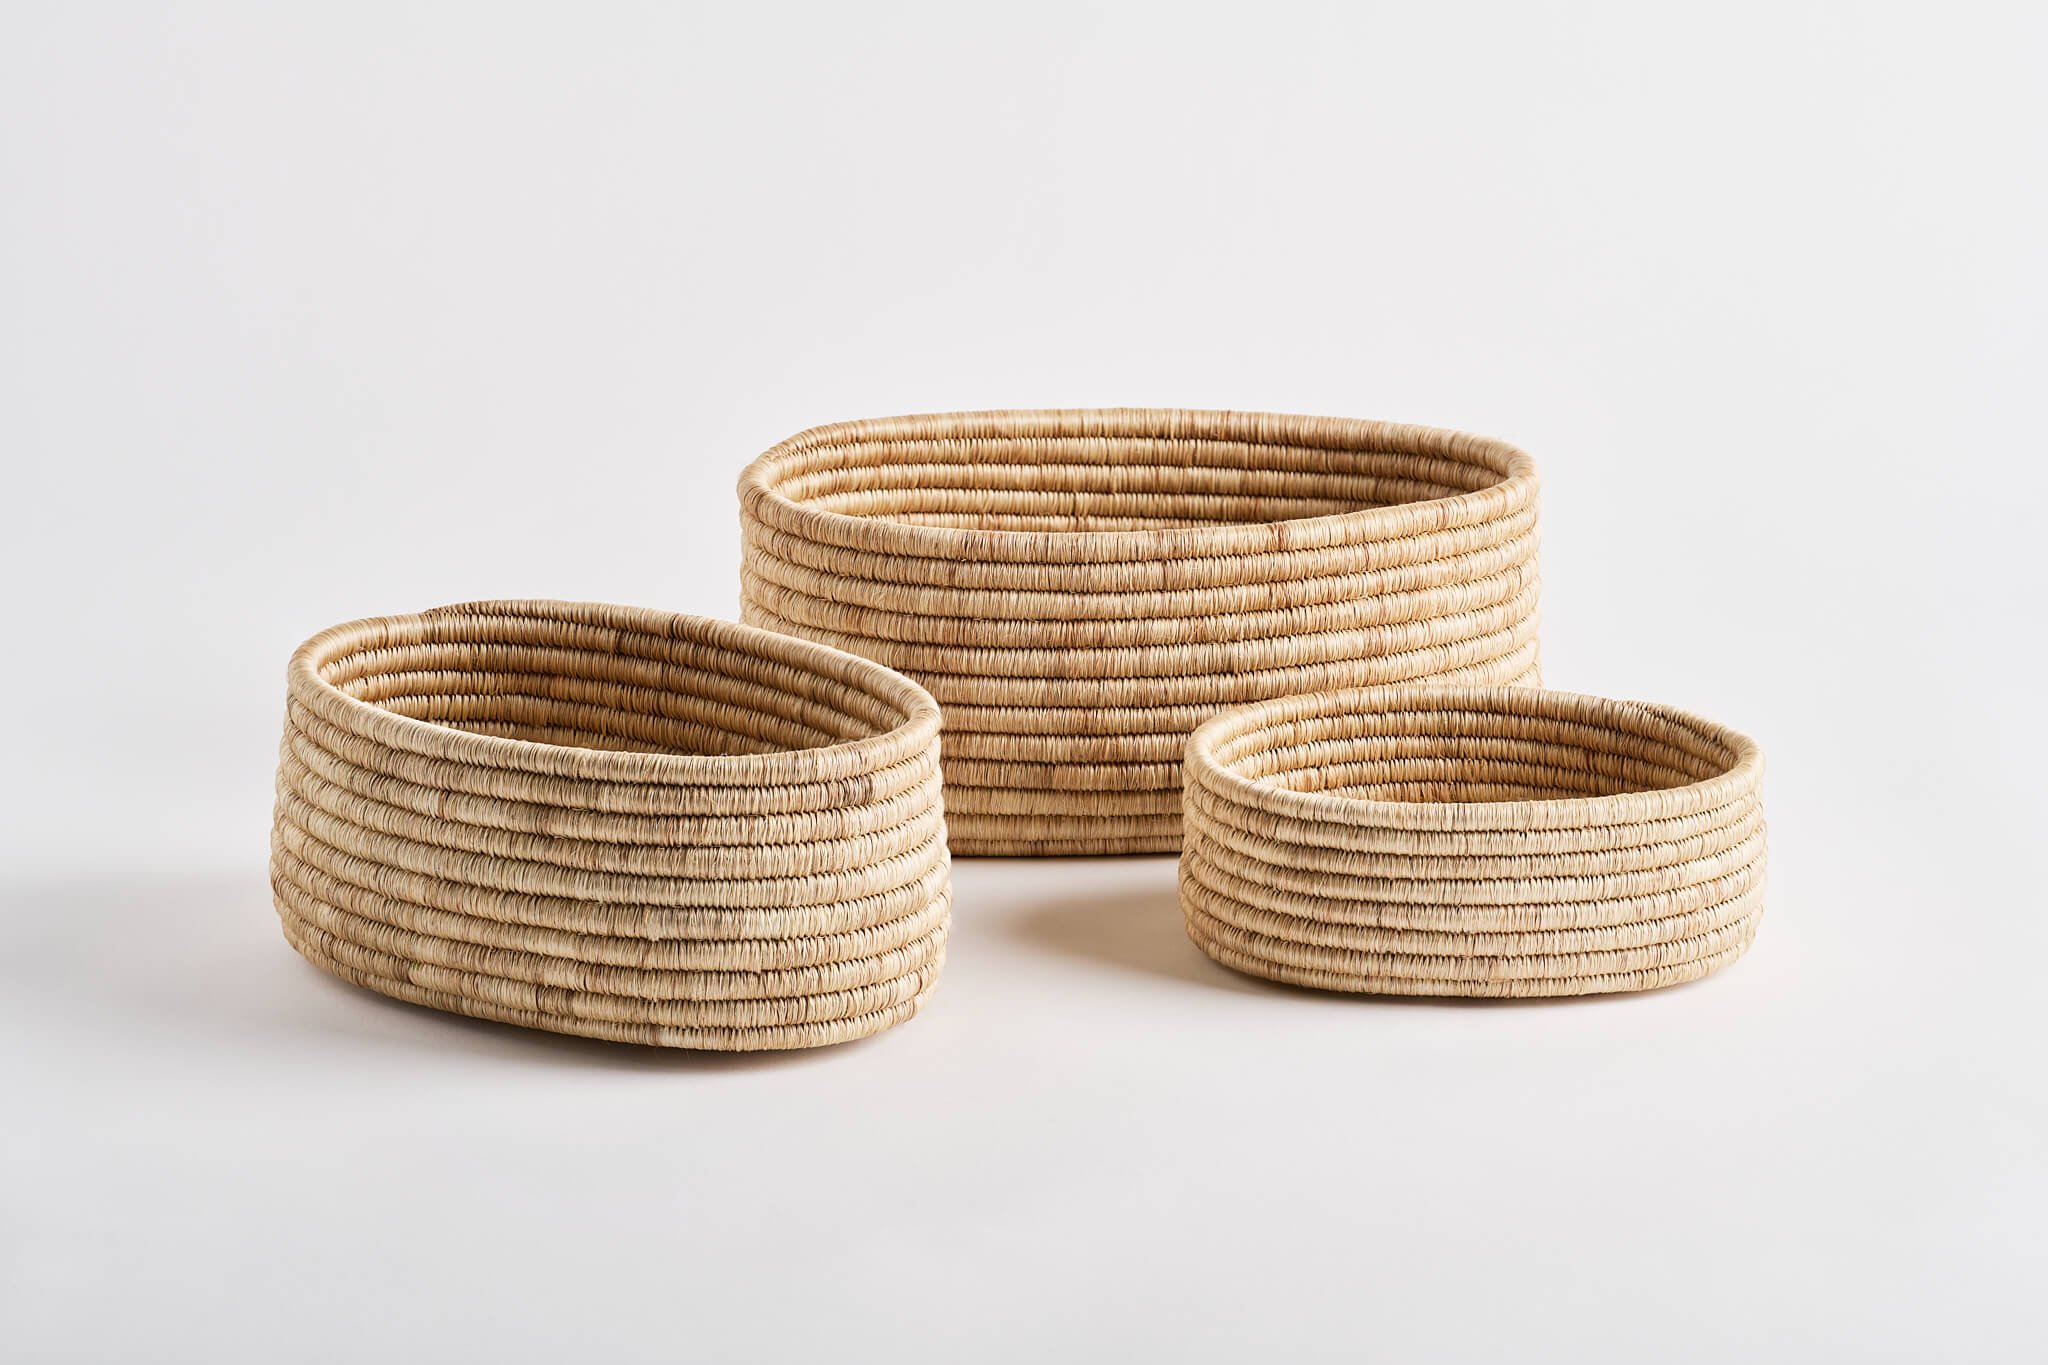 Morenas Oval Baskets - from $42